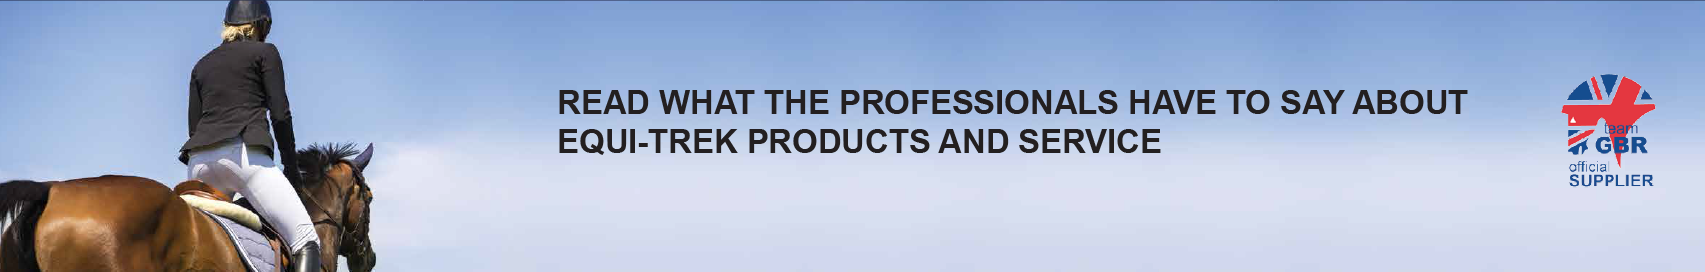 READ WHAT THE PROFESSIONALS HAVE TO SAY ABOUT EQUI-TREK PRODUCTS AND SERVICE